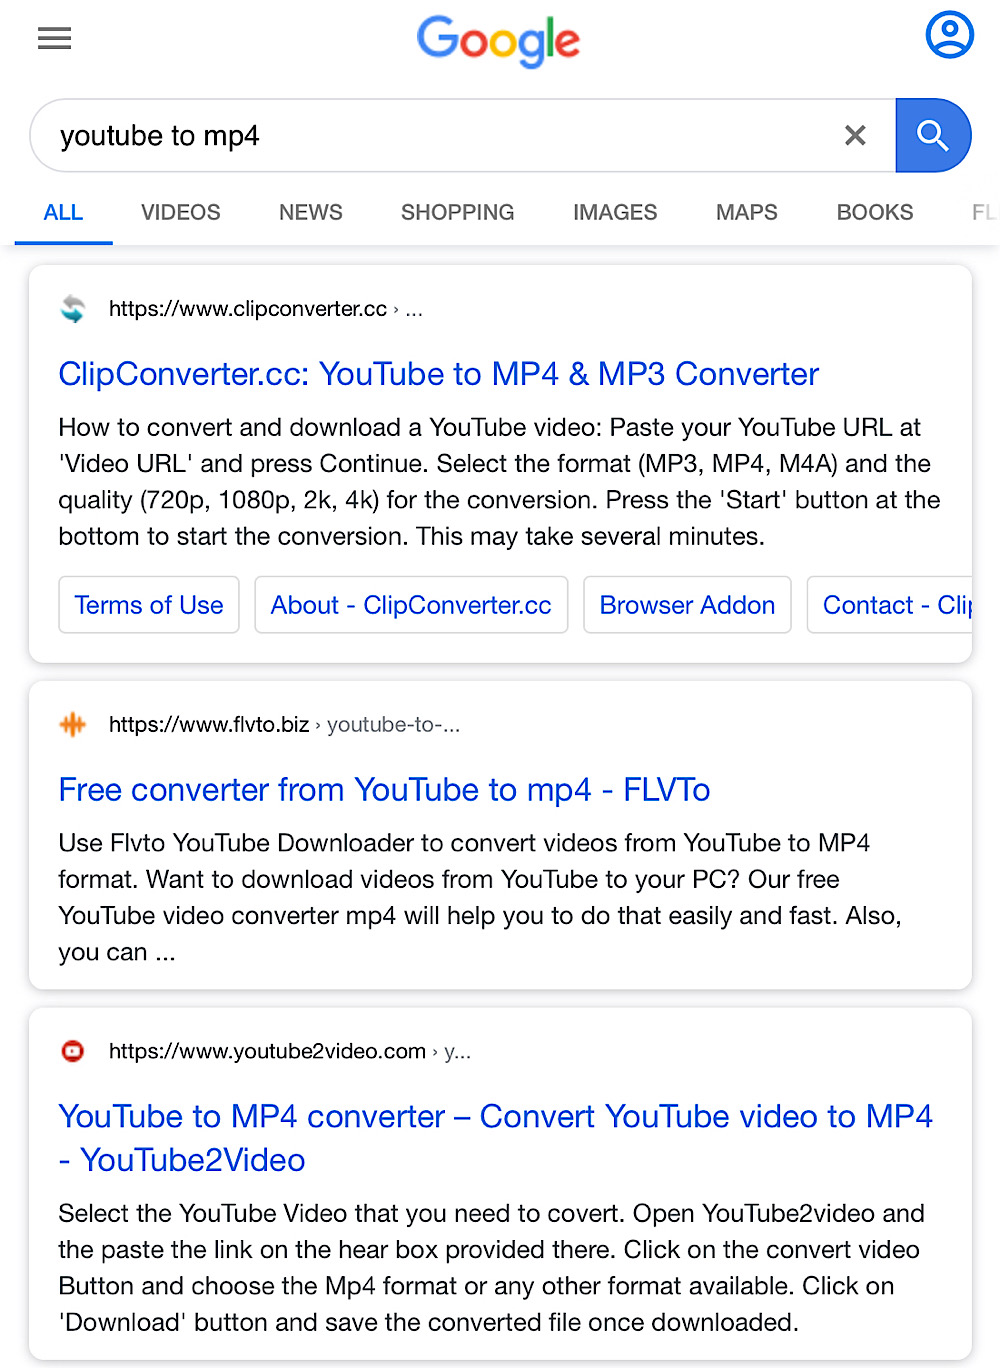 flvto.biz is still topping the Google Search results for “youtube to mp4”